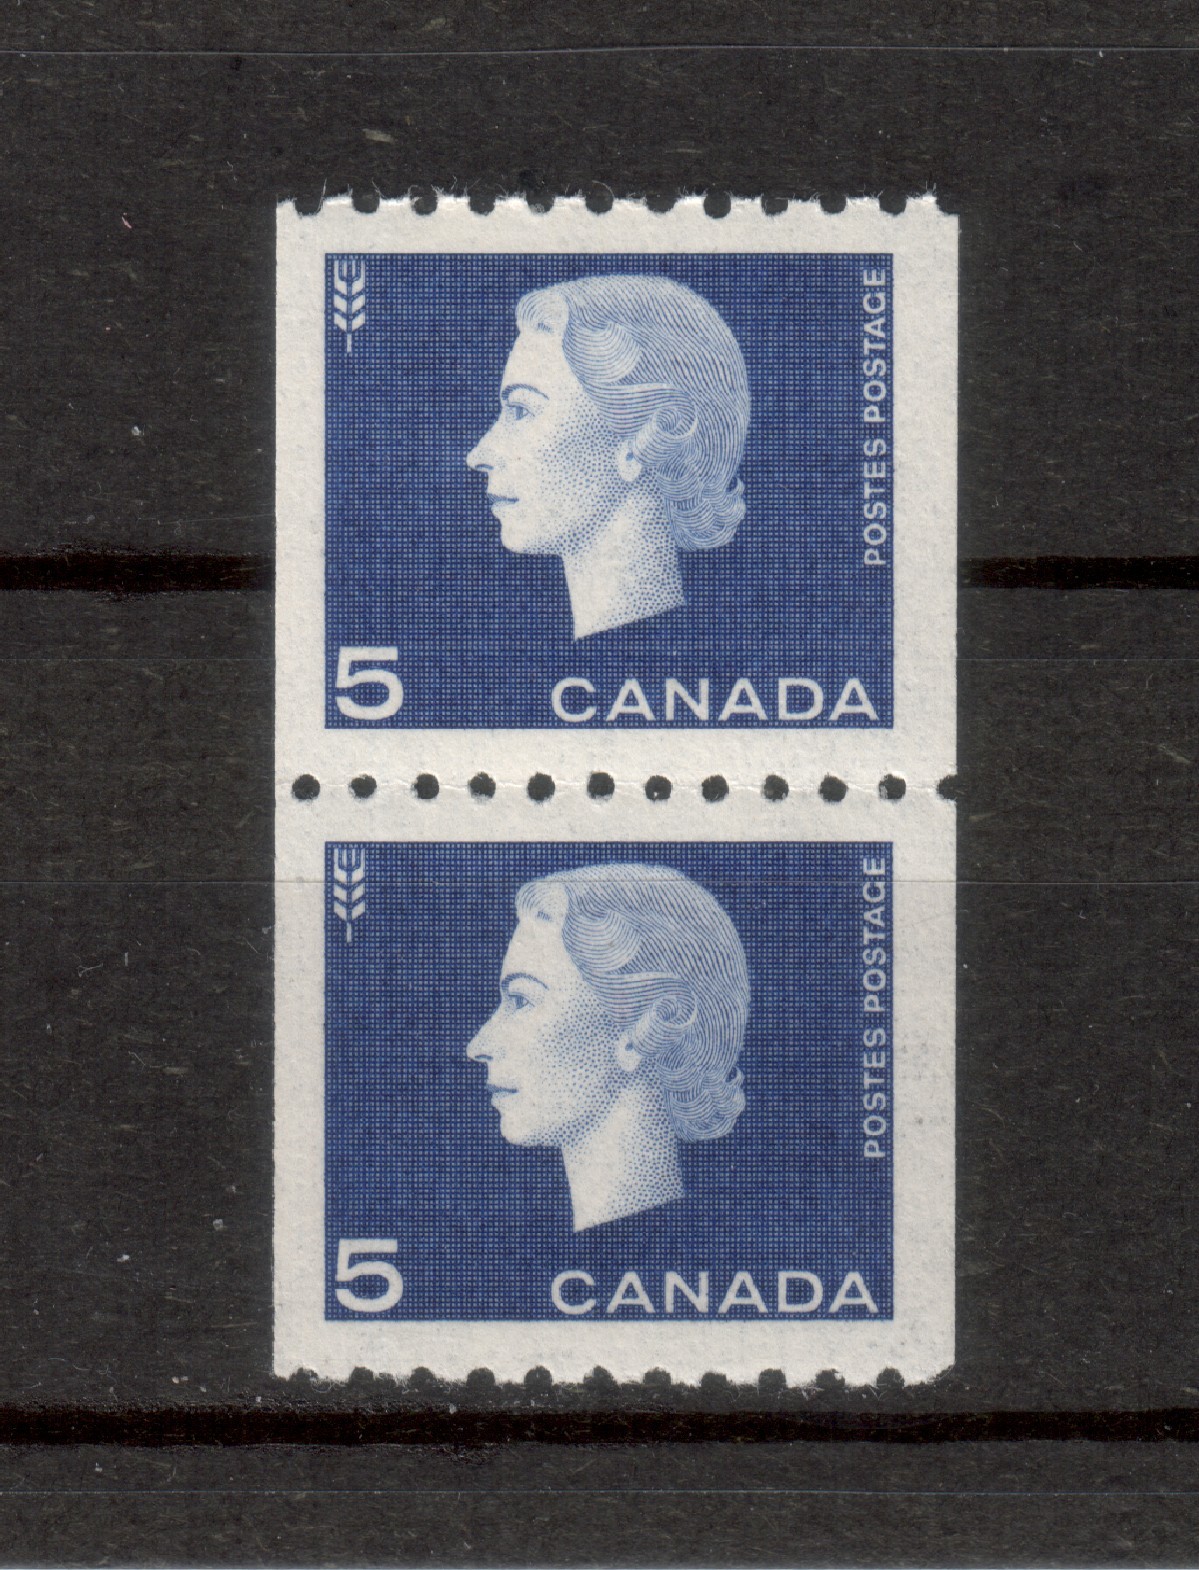 Primary image for Canada  - SC#409 Pair Mint NH  -  5 cent Cameo Coil issue